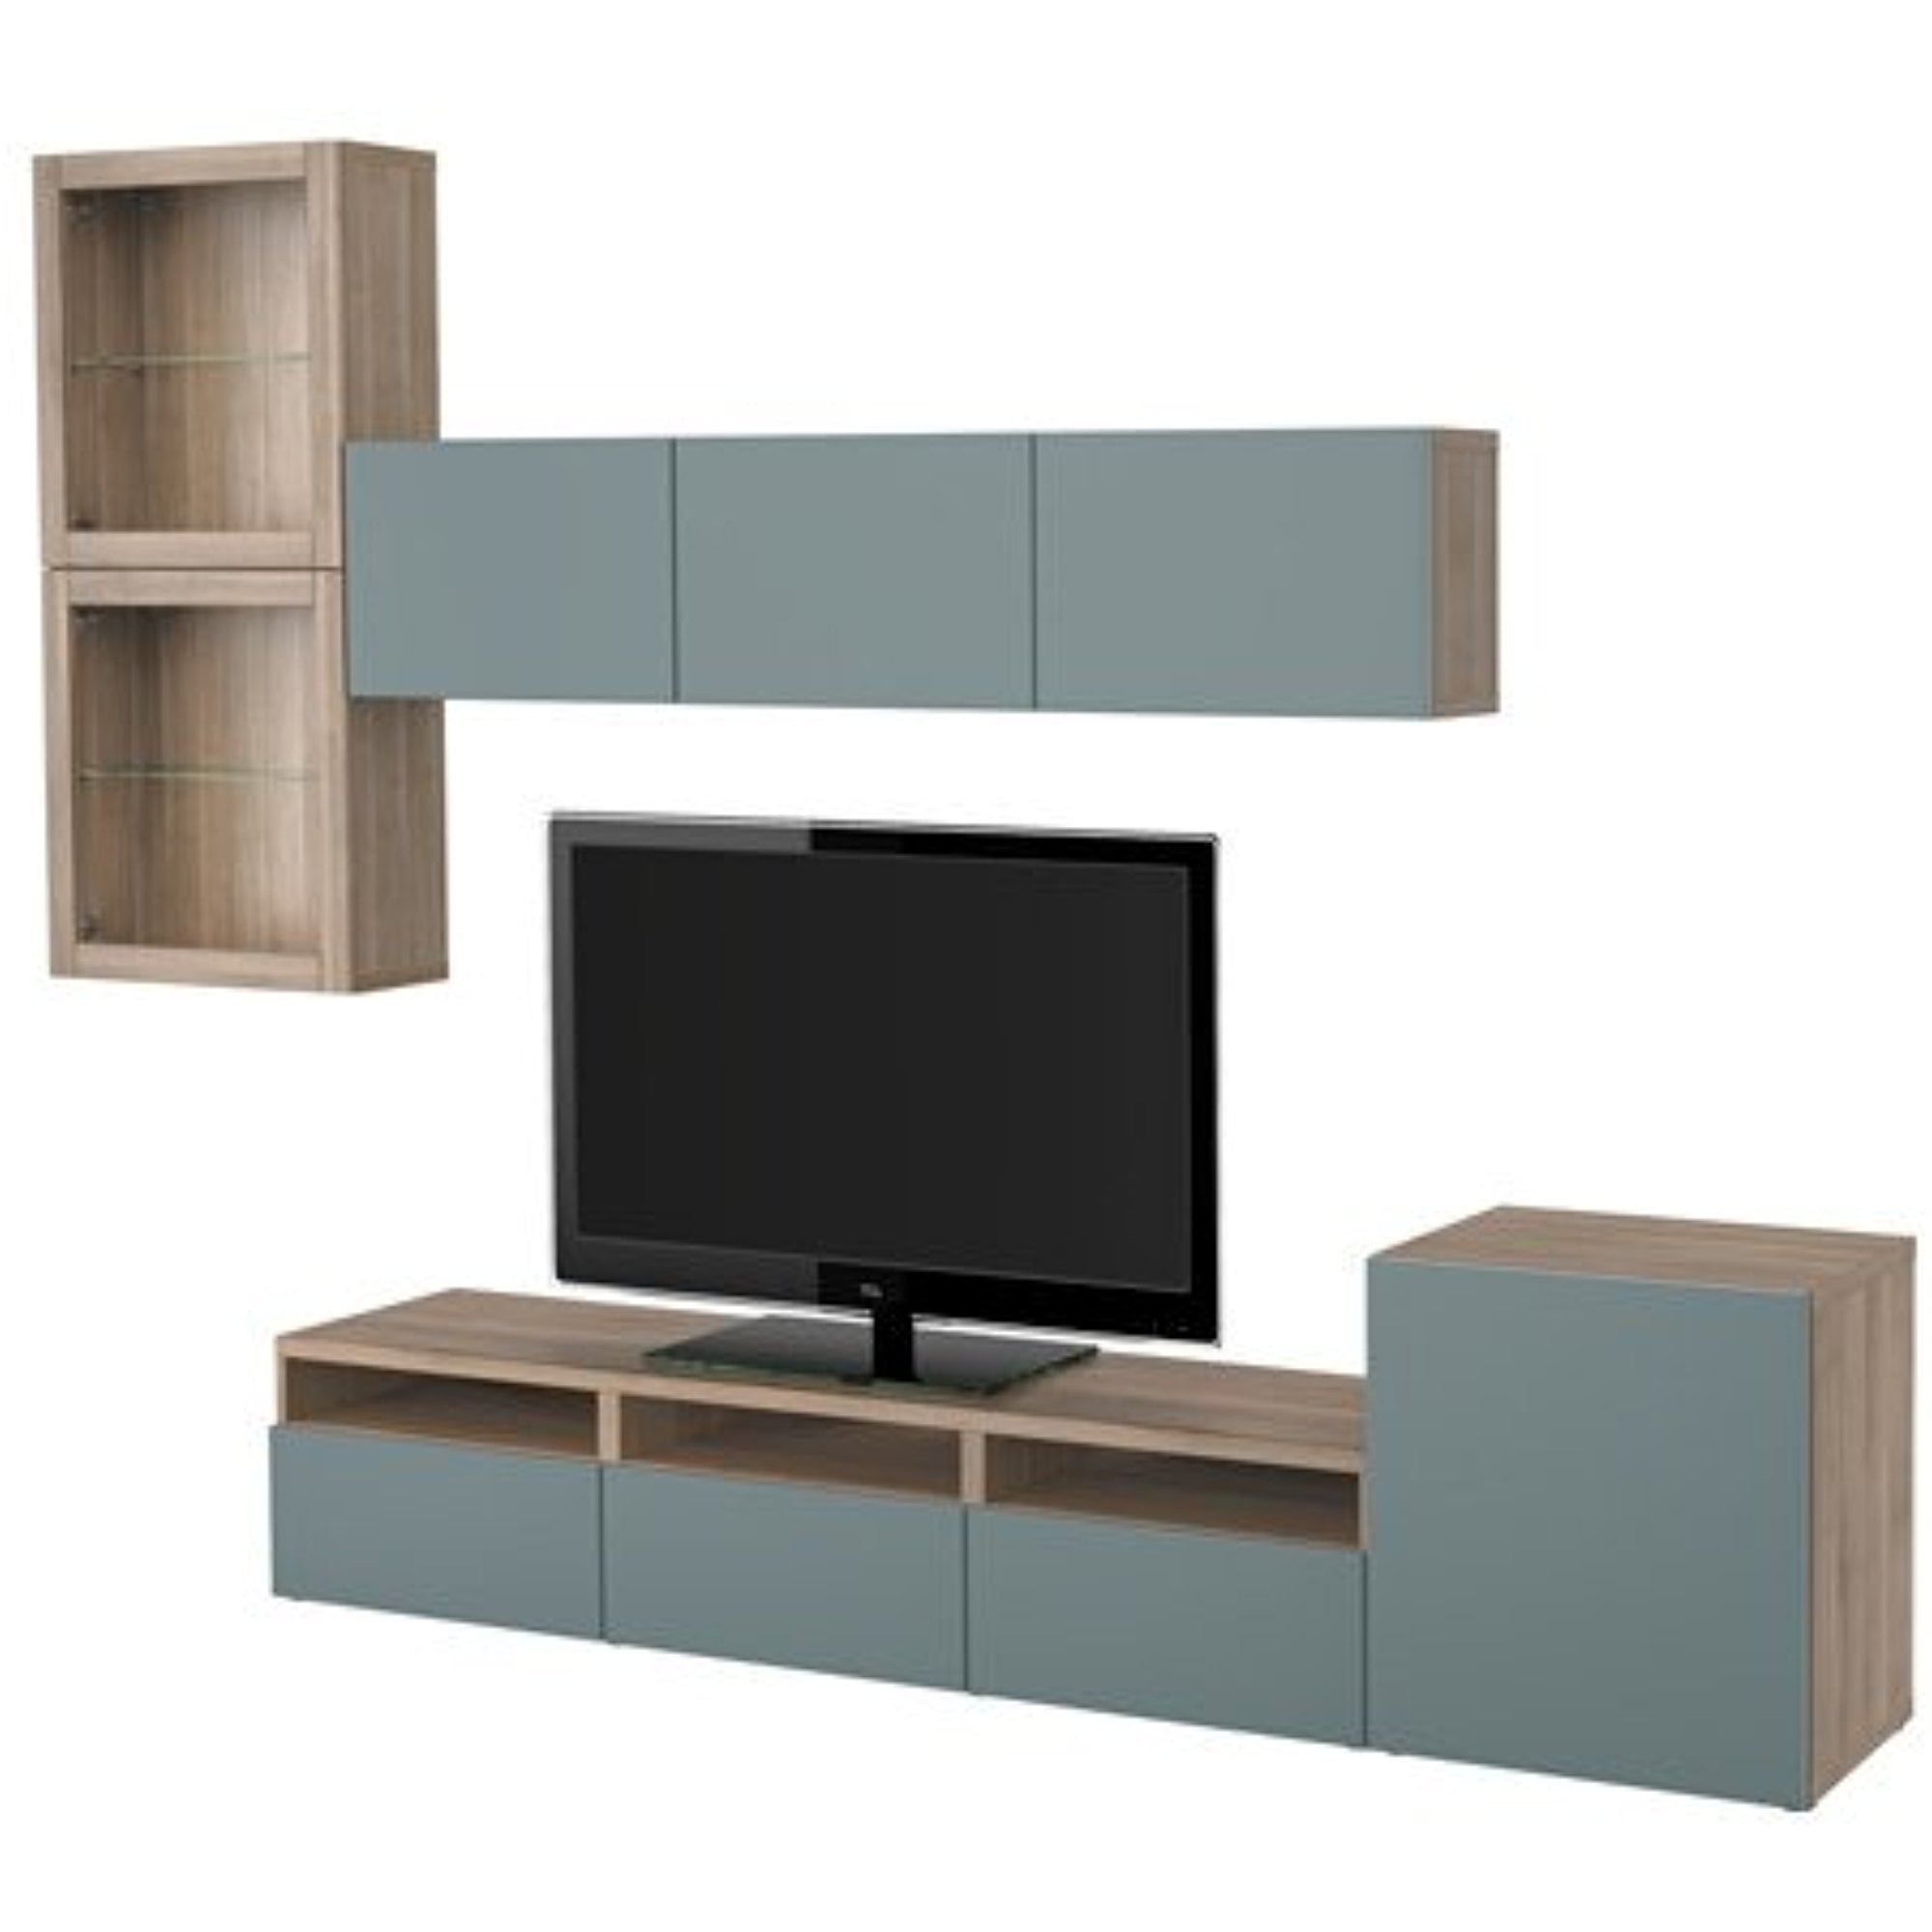 Kalmerend Medewerker Bomen planten Ikea TV storage combination with push-open drawers and glass doors, gray  stained walnut eff clear glass, Valviken gray-turquoise clear glass  12204.112317.1418 - Walmart.com